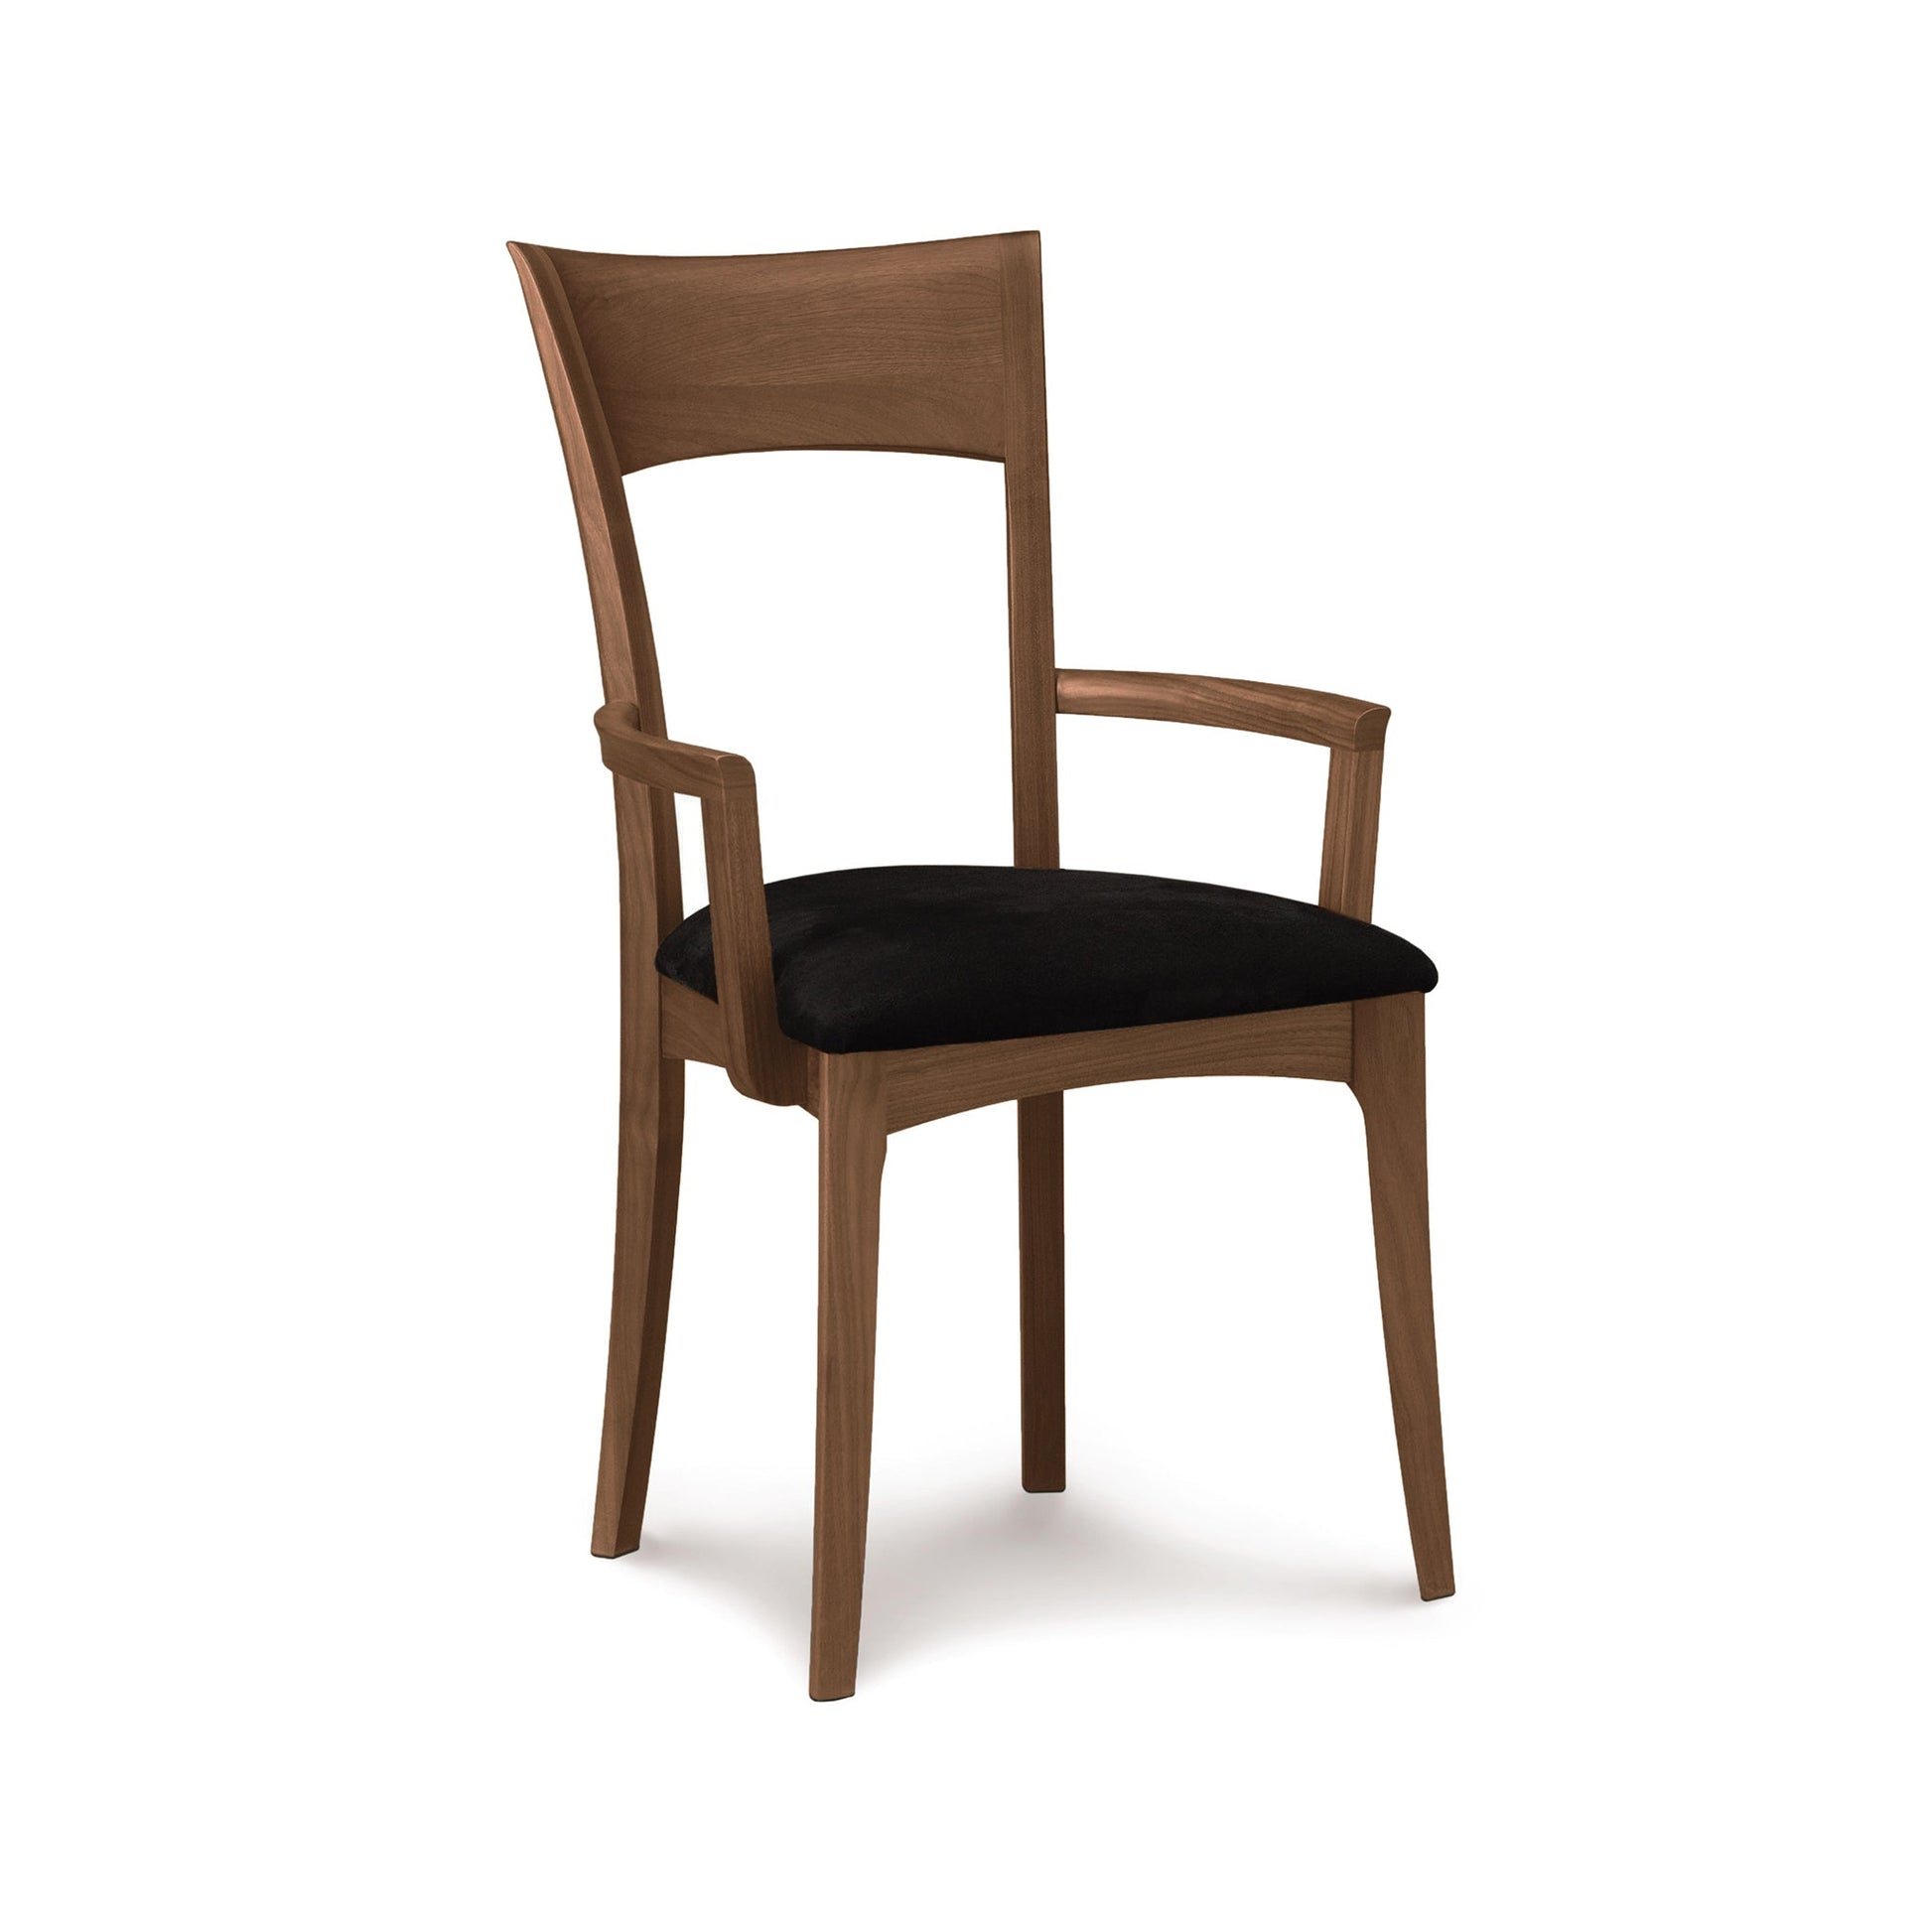 An Ingrid Chair - Priority Ship by Copeland Furniture, made of solid American cherry wood, with a black cushion.